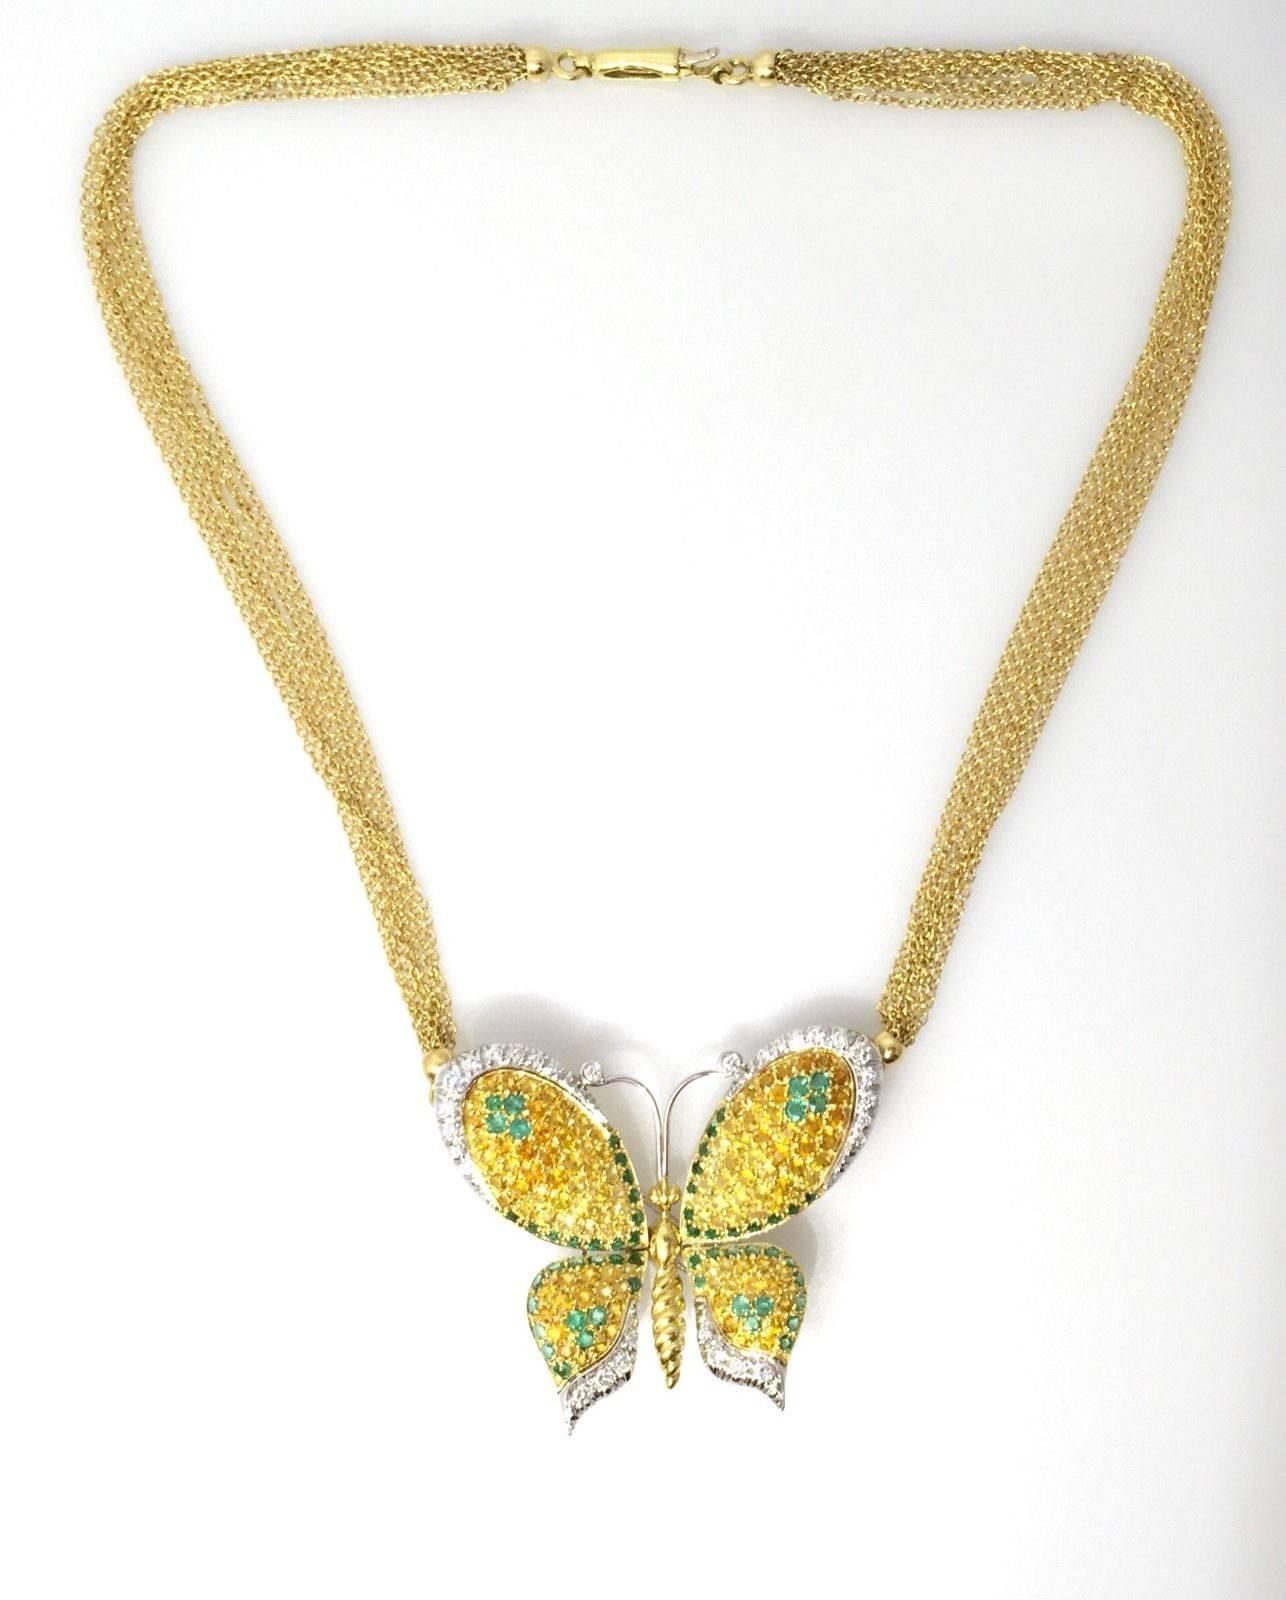 Chimento butterfly pendant encrusted with yellow Sapphire, Emerald and diamonds in 18k yellow & white gold.  The butterfly's wings are set primarily with approx 3.80 cts of yellow Sapphires, approx 1.40 ct of Emeralds, and approx 1 ct of round